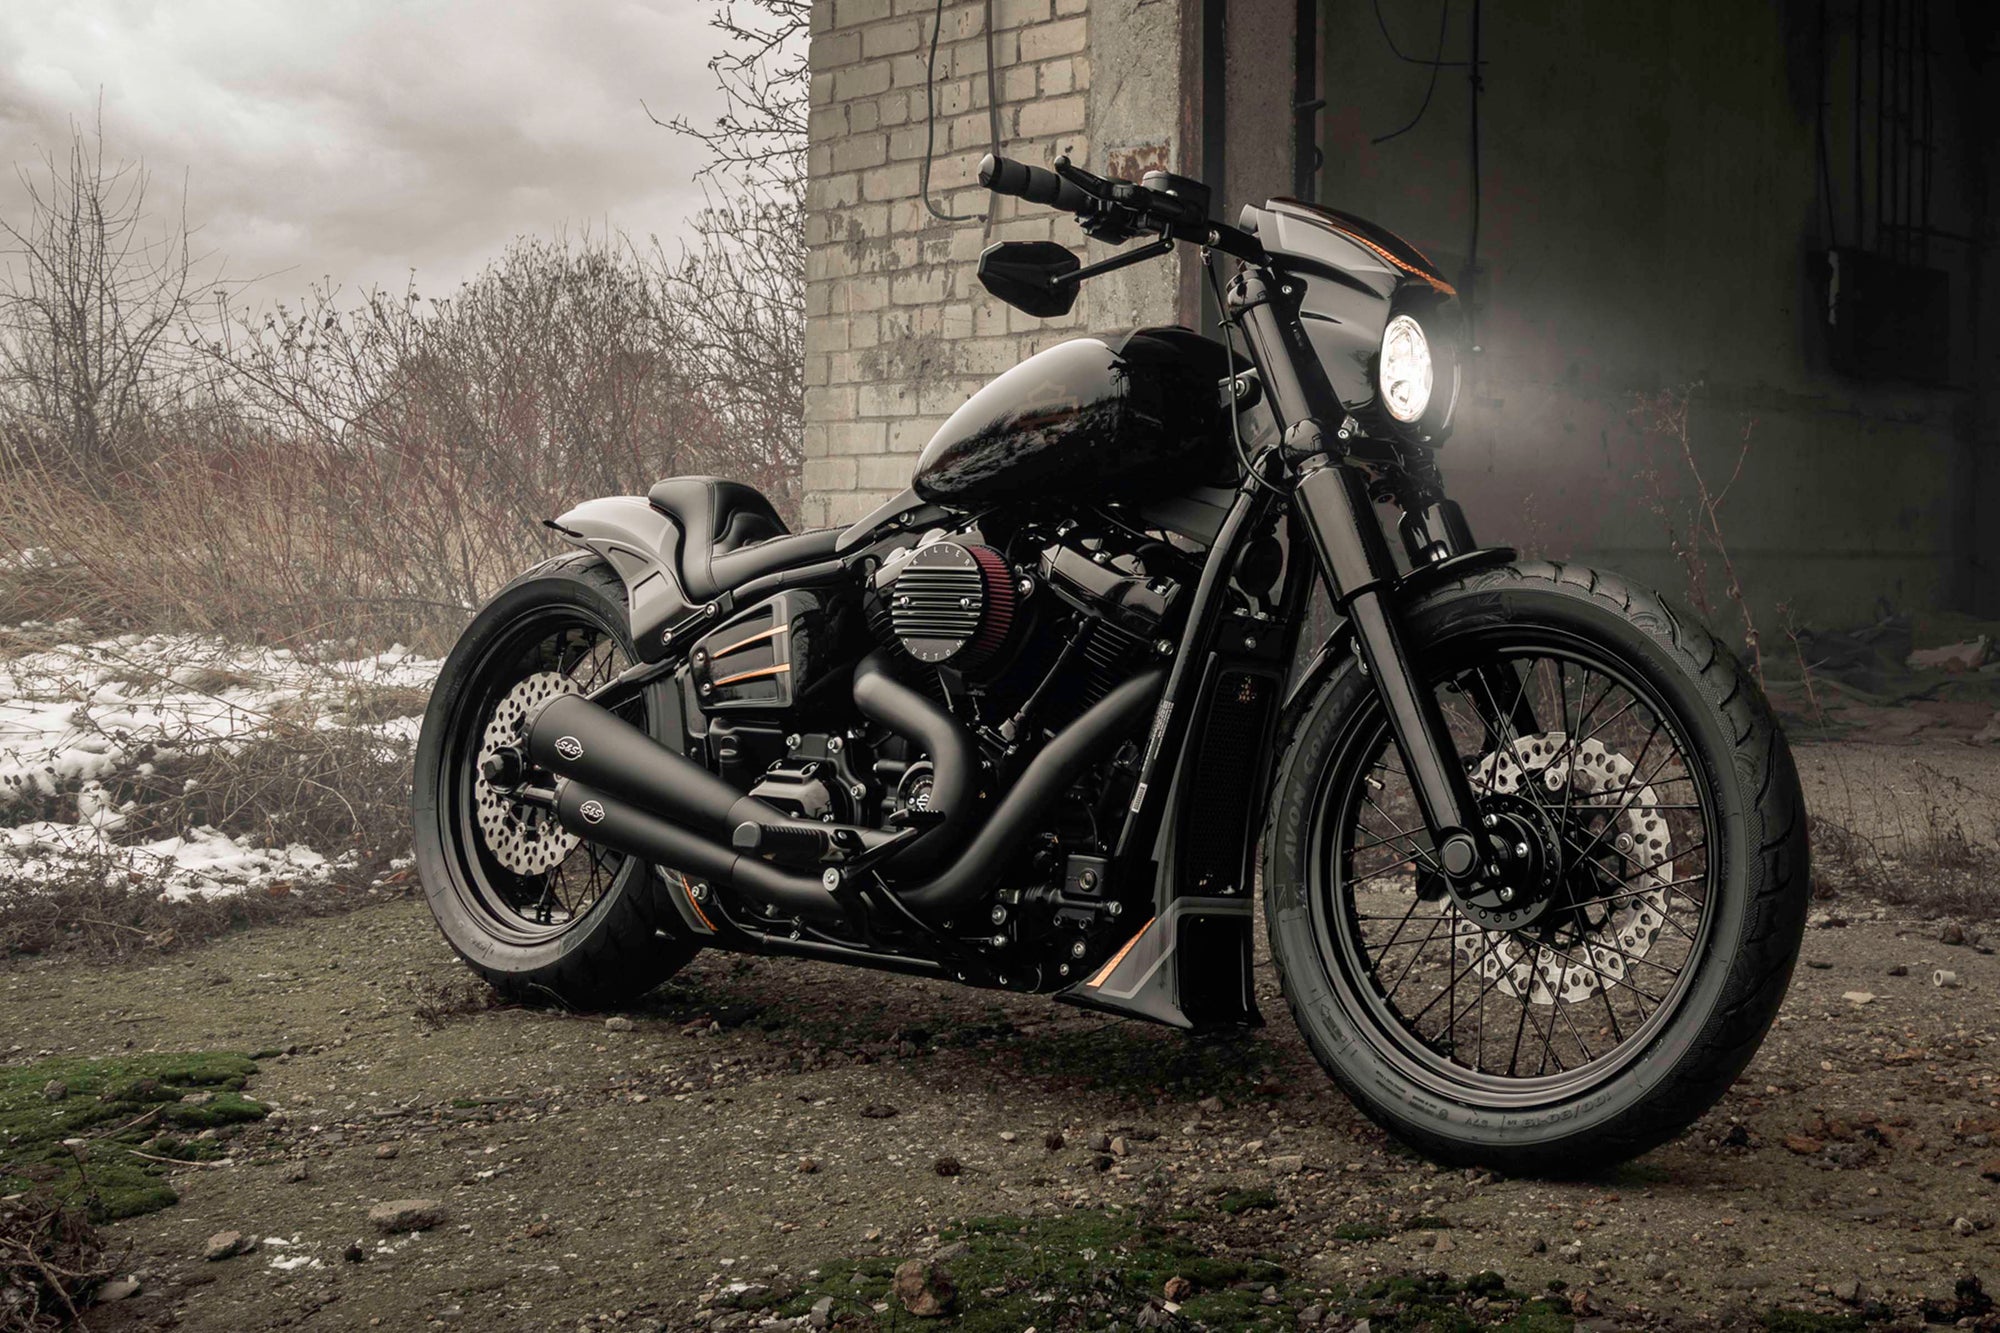 Modified Harley Davidson Street Bob motorcycle with Killer Custom parts from the side outside in an abandoned environment with some snow in the background